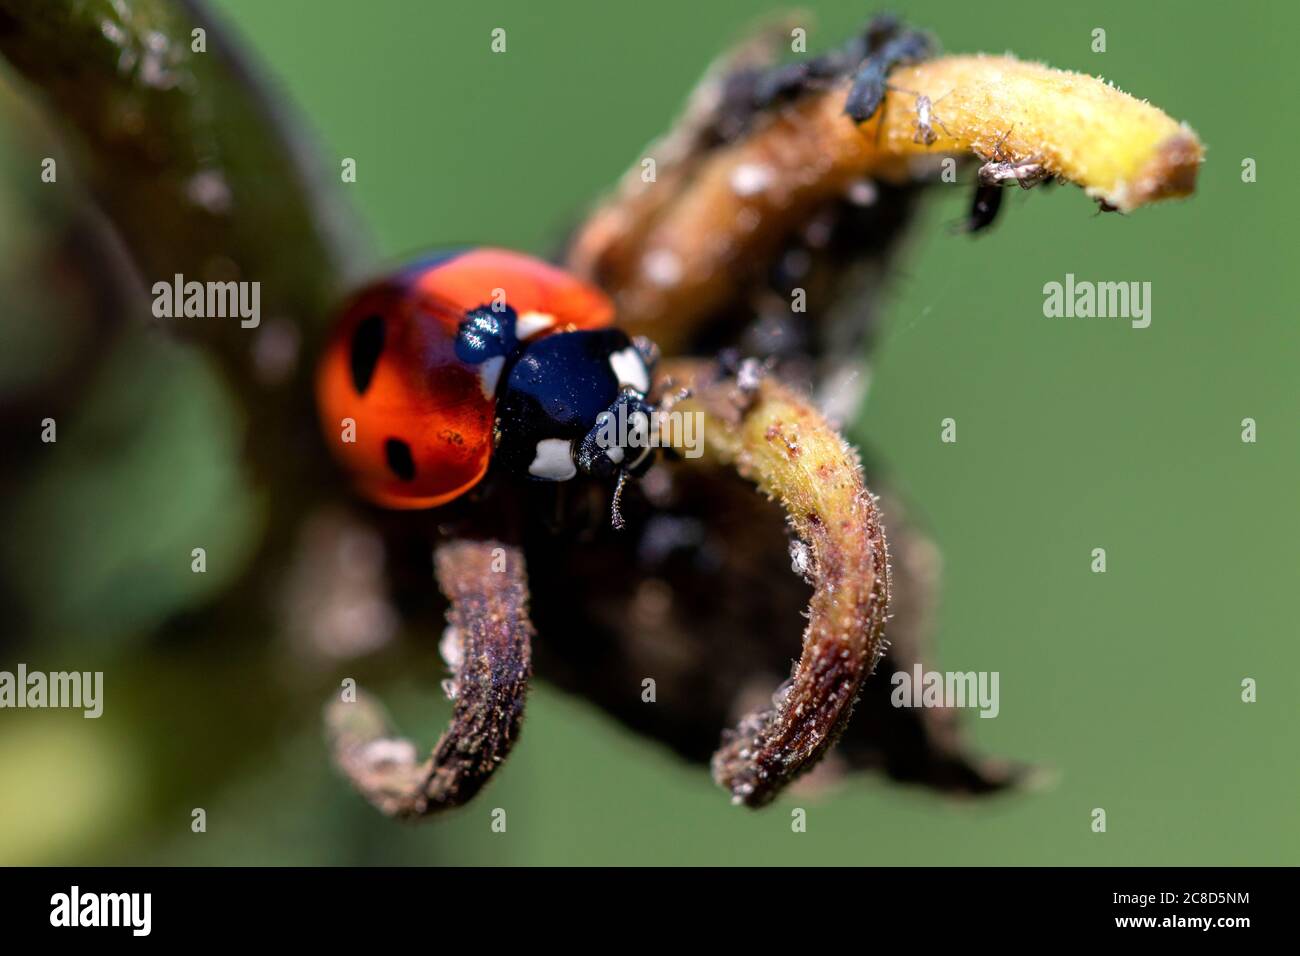 A macro portrait of a ladybug sitting at the tip of a branch in a wilted flower. The insect was just sittings their and looking around. Stock Photo